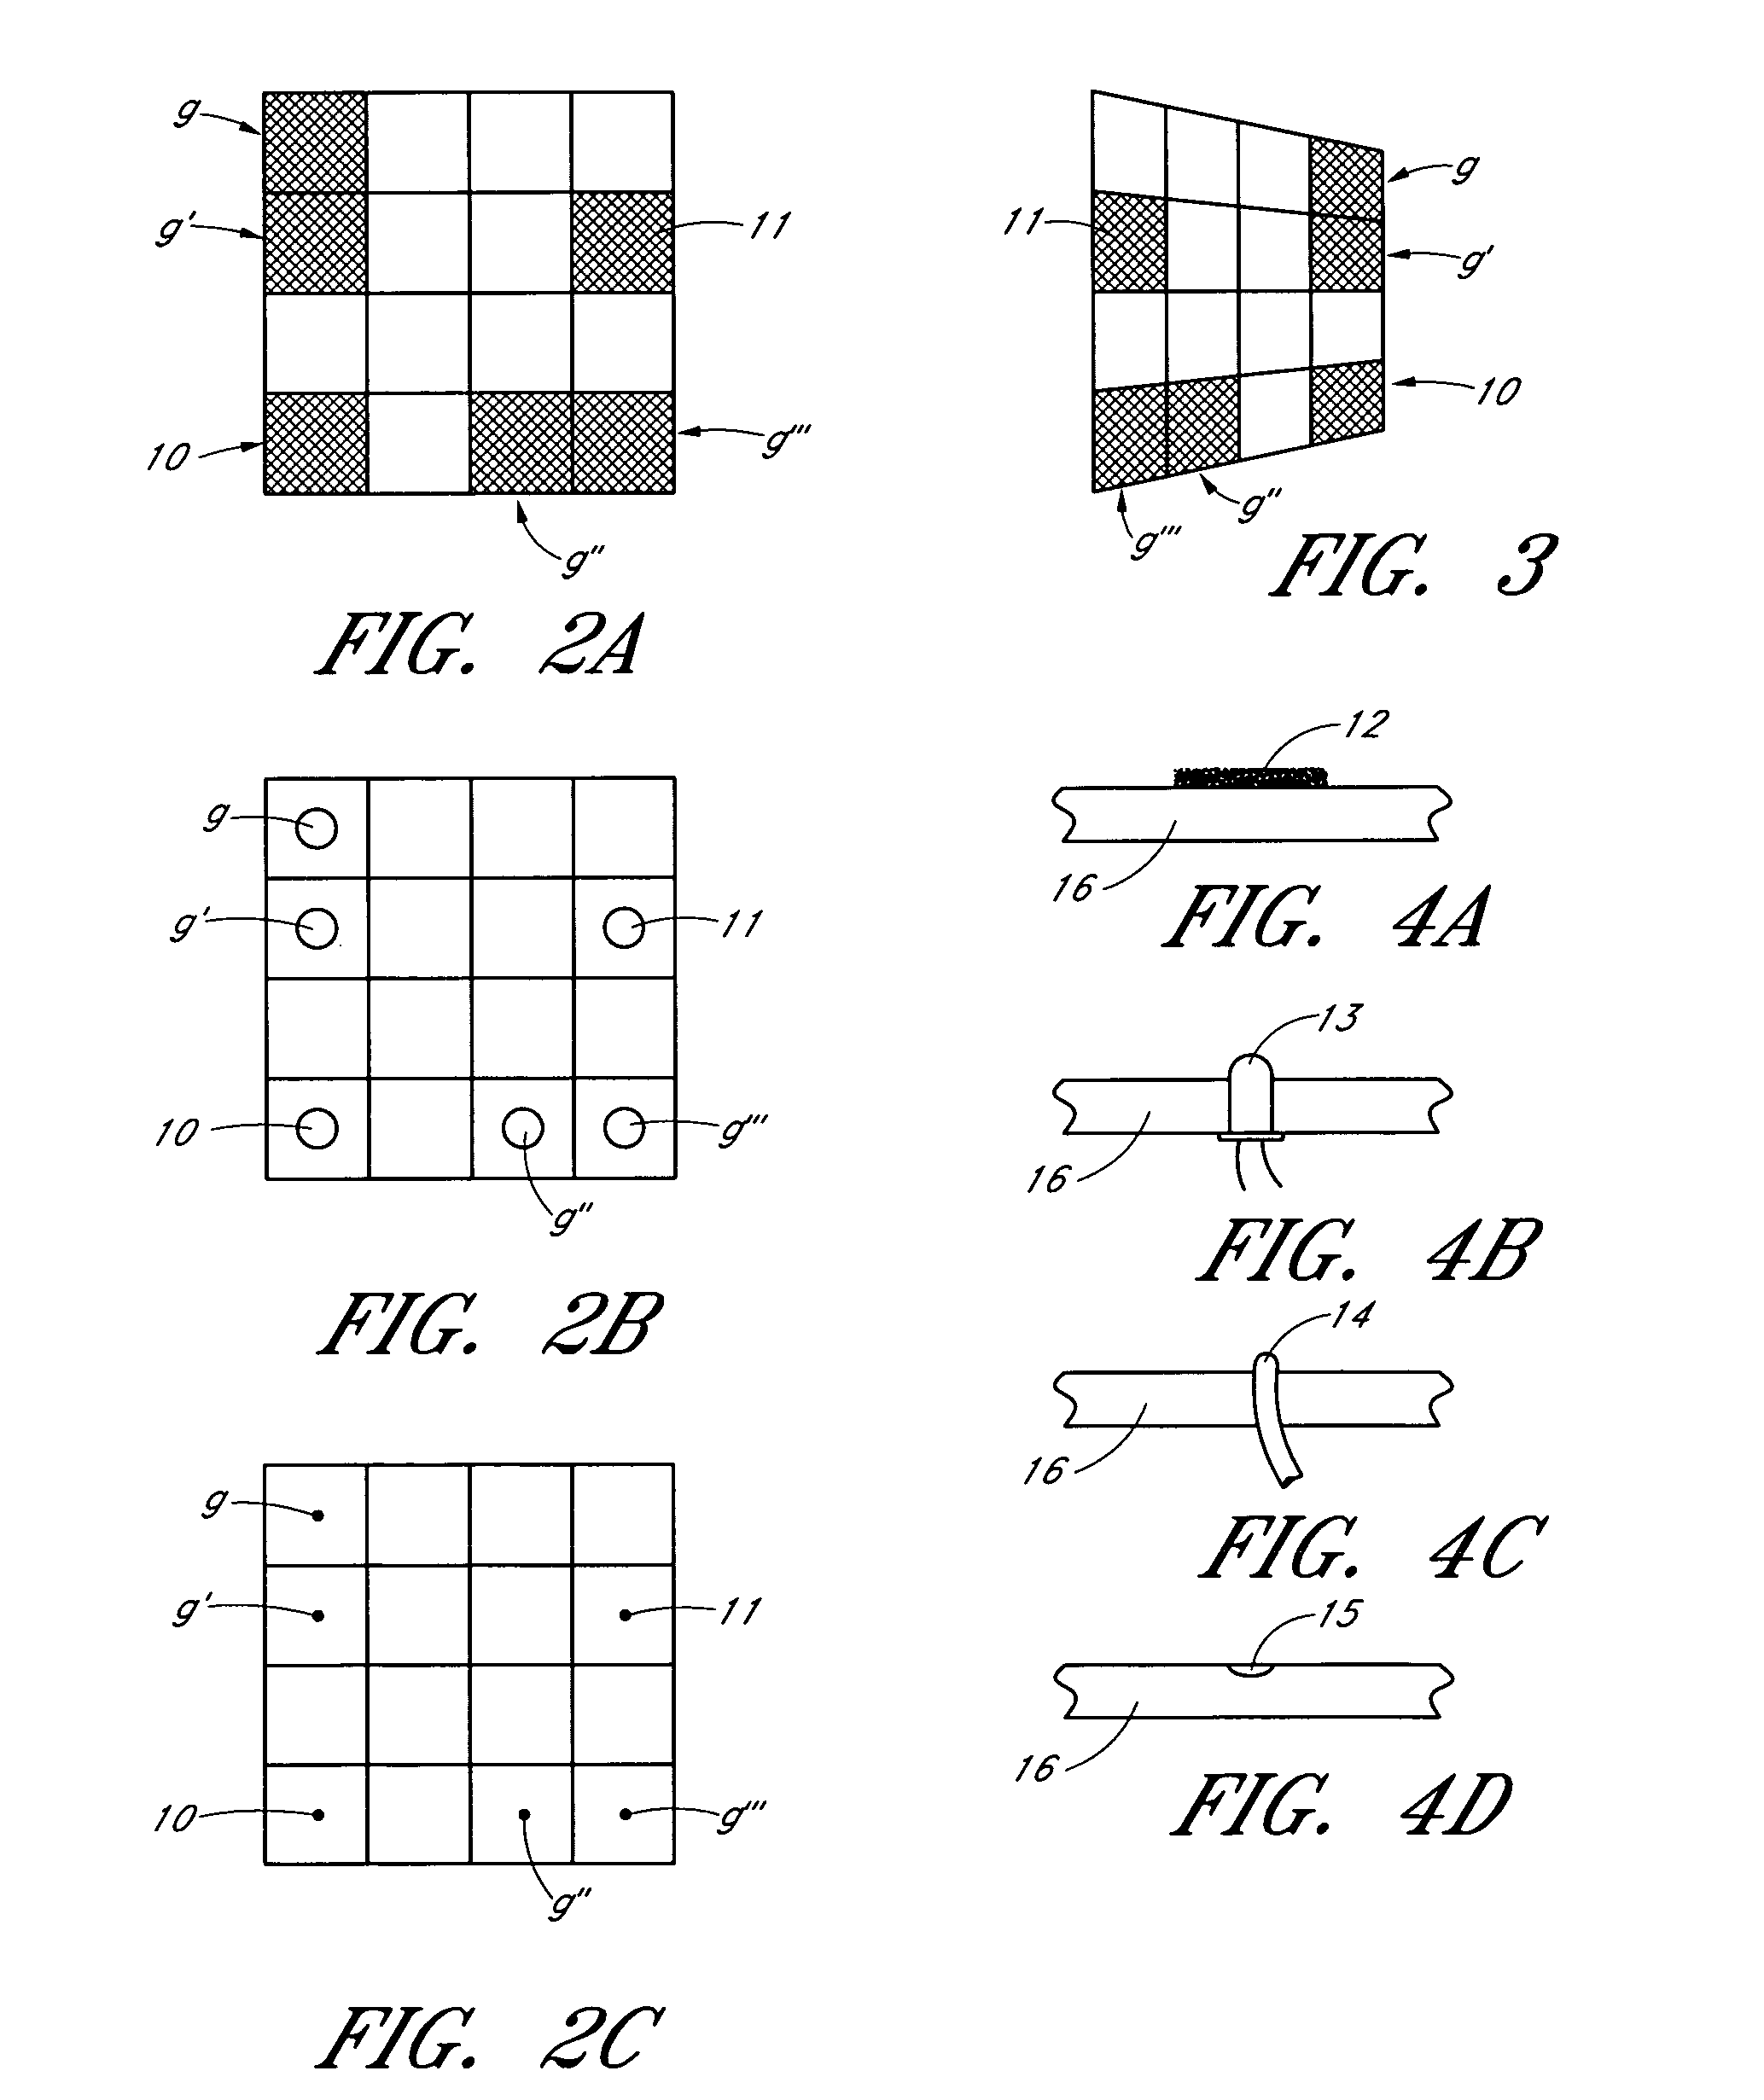 X-ray diagnostic imaging system with a plurality of coded markers